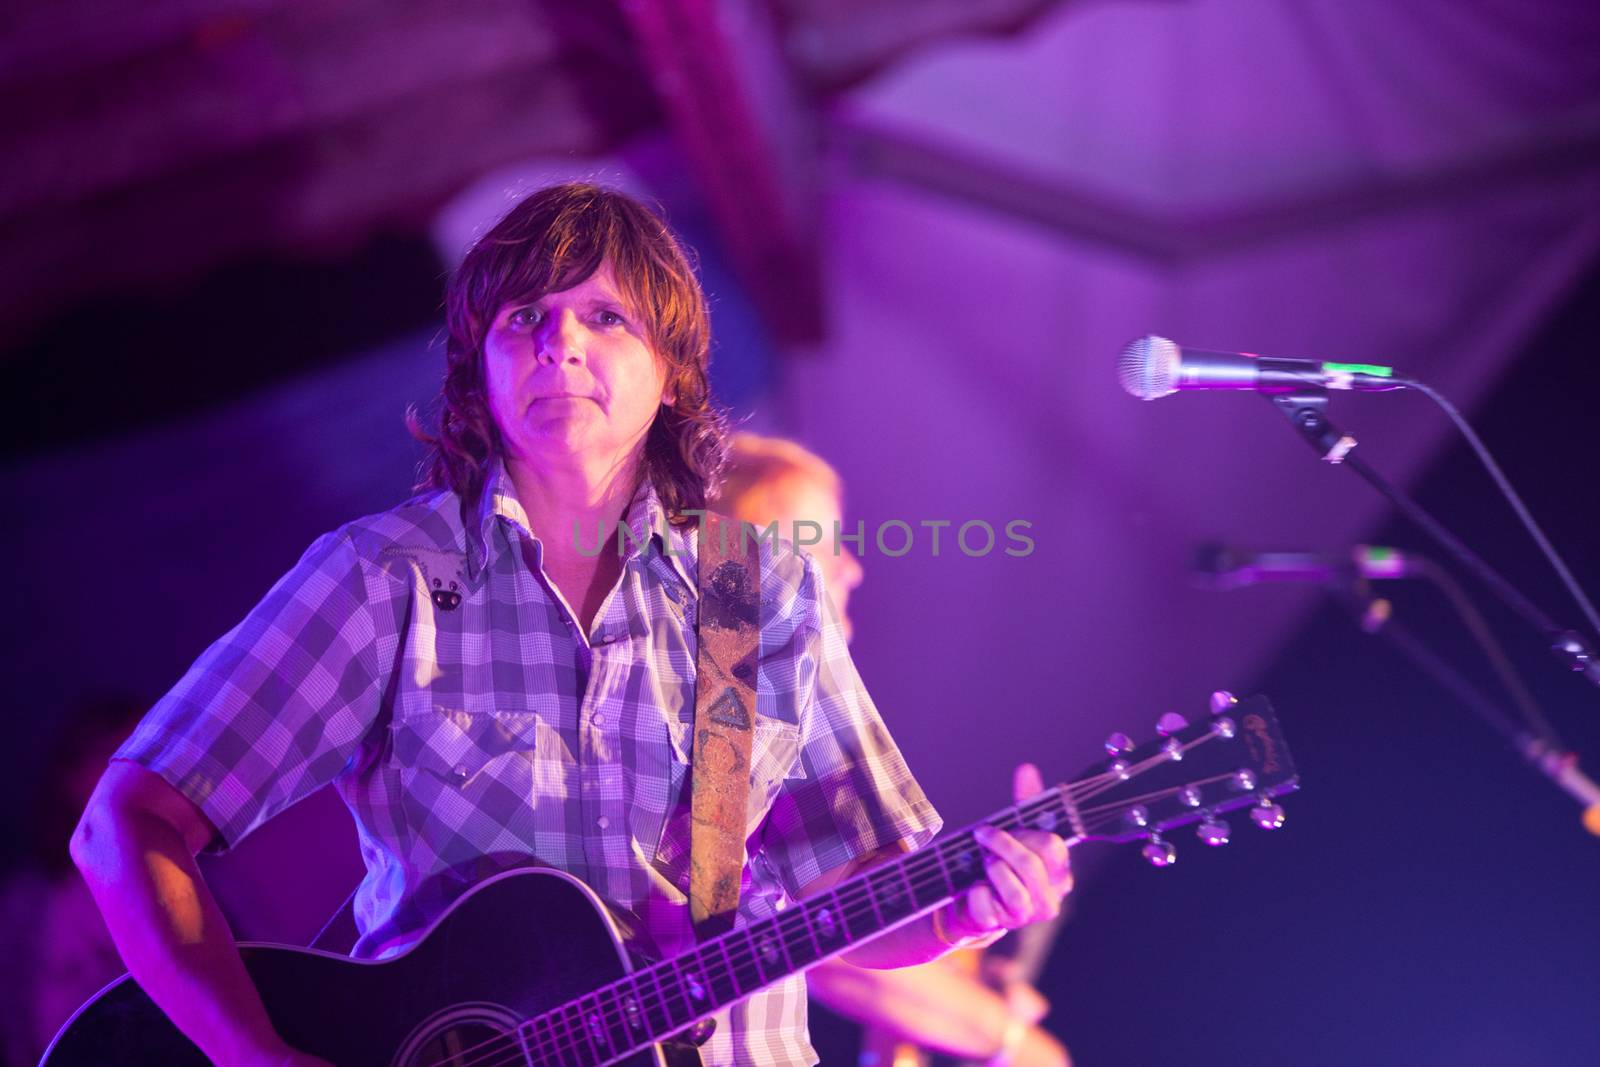 HOT SPRINGS, NC - AUGUST 10: The Indigo Girls partner Amy Ray plays guitar on stage at the Wild Goose Festival at night on August 10, 2013 in Hot Springs, NC, USA